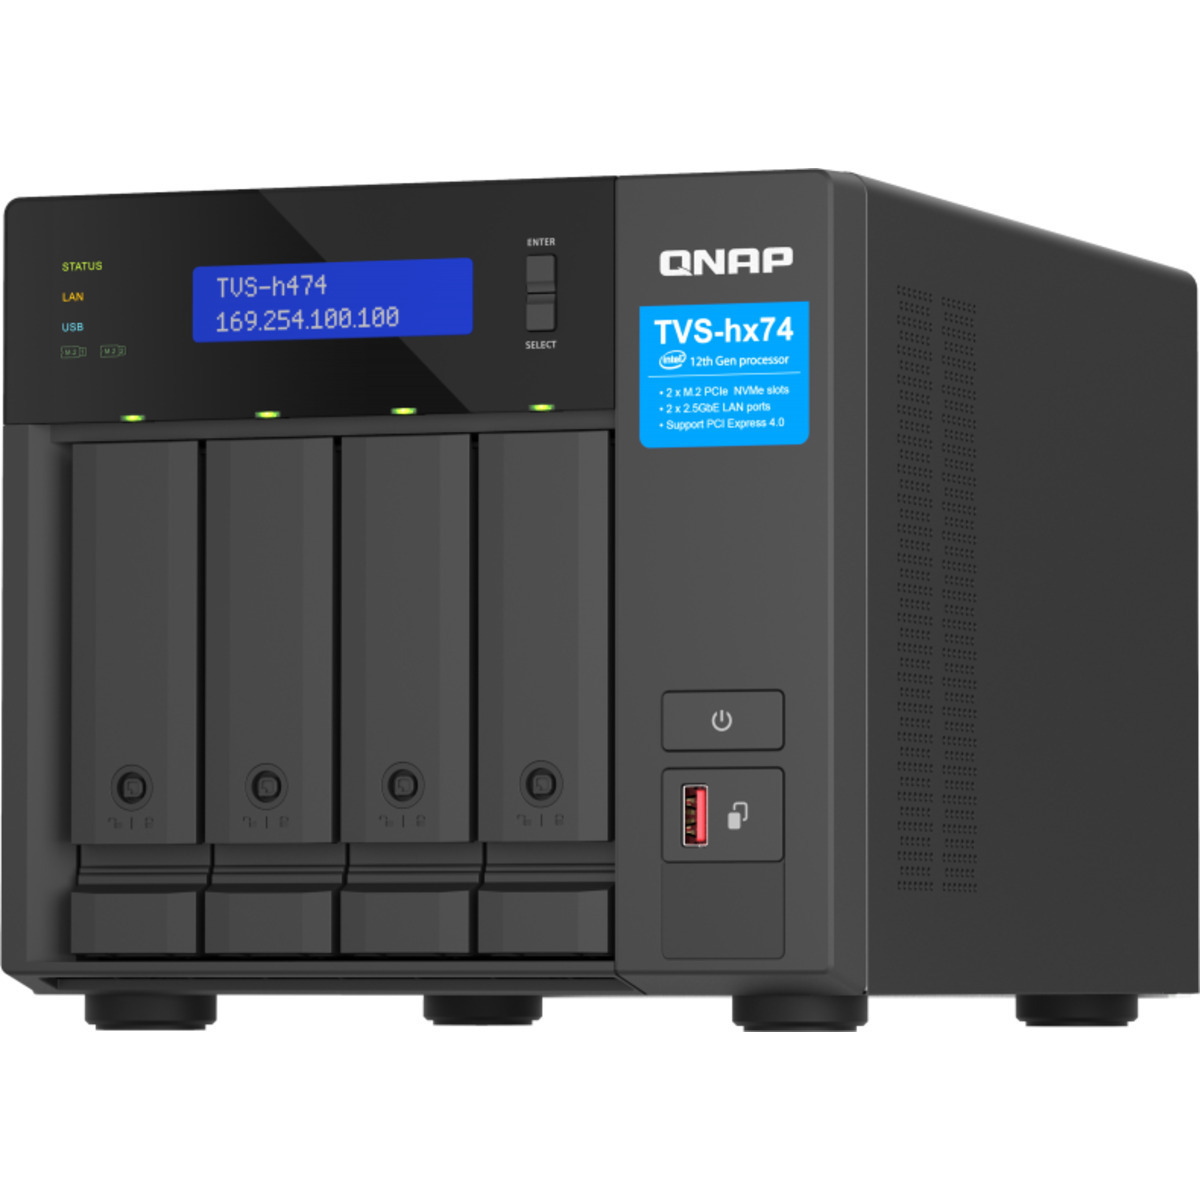 buy QNAP TVS-h474 Pentium Gold 16tb Desktop NAS - Network Attached Storage Device 4x4000gb Seagate BarraCuda ST4000DM004 3.5 7200rpm SATA 6Gb/s HDD CONSUMER Class Drives Installed - Burn-In Tested - FREE RAM UPGRADE - nas headquarters buy network attached storage server device das new raid-5 free shipping usa spring sale TVS-h474 Pentium Gold